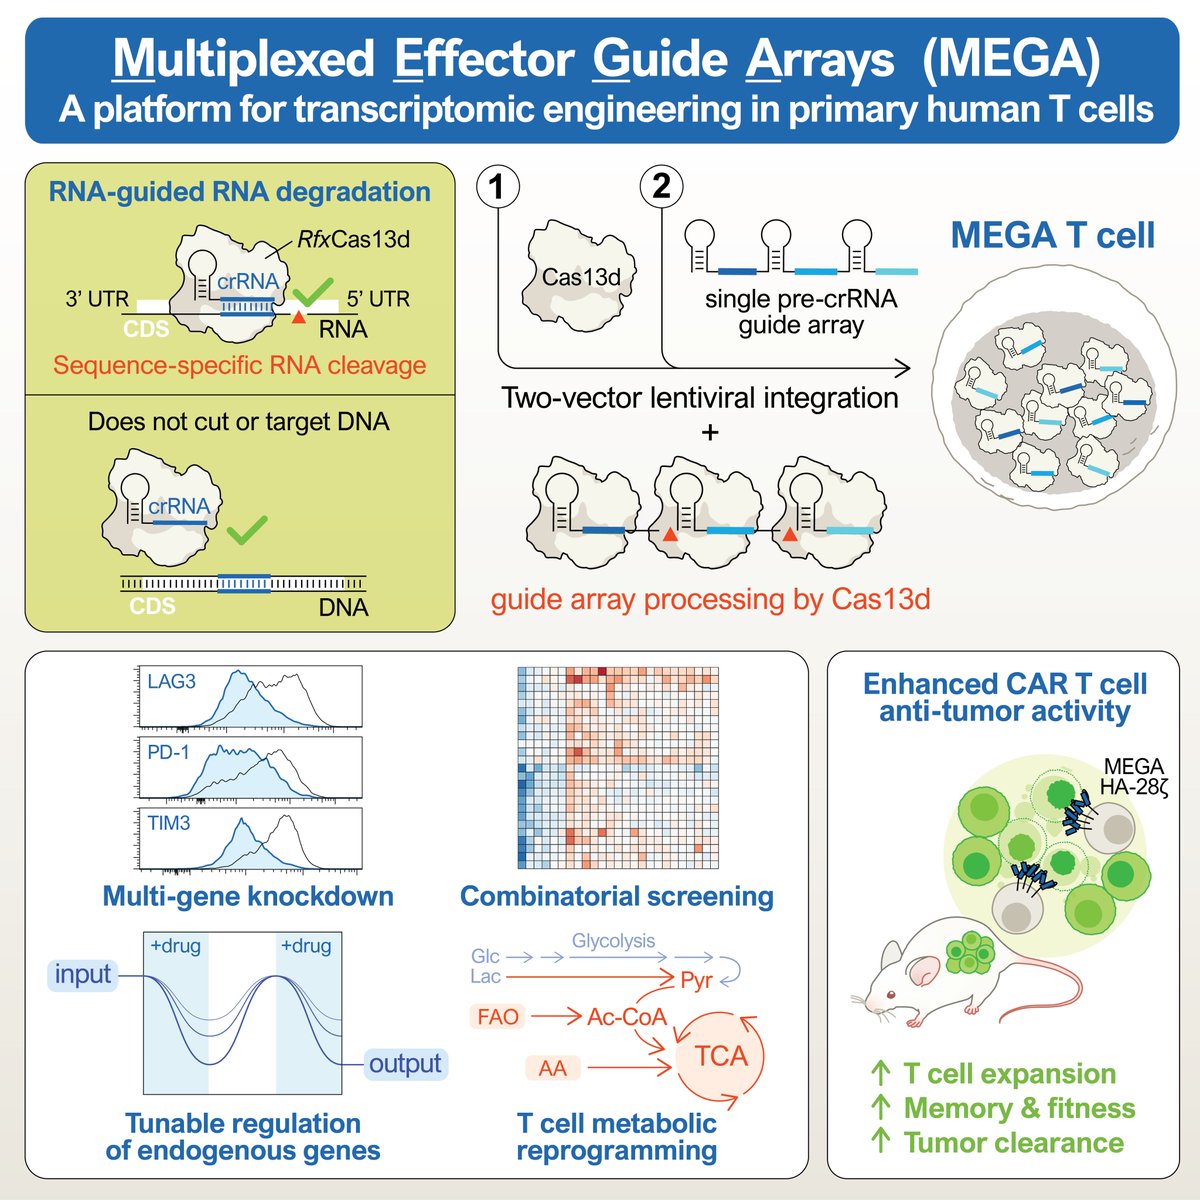 🗣️wahoo!!! my doctoral work is out online in @CellCellPress: authors.elsevier.com/c/1ie1VL7PXqPm4!! couldn't have done it without my two wonderful labs and co-advisors @stanleyqilab & @MackallLab we developed a new RNA-targeting CRISPR platform (MEGA) to engineer better T cell therapies...🧵